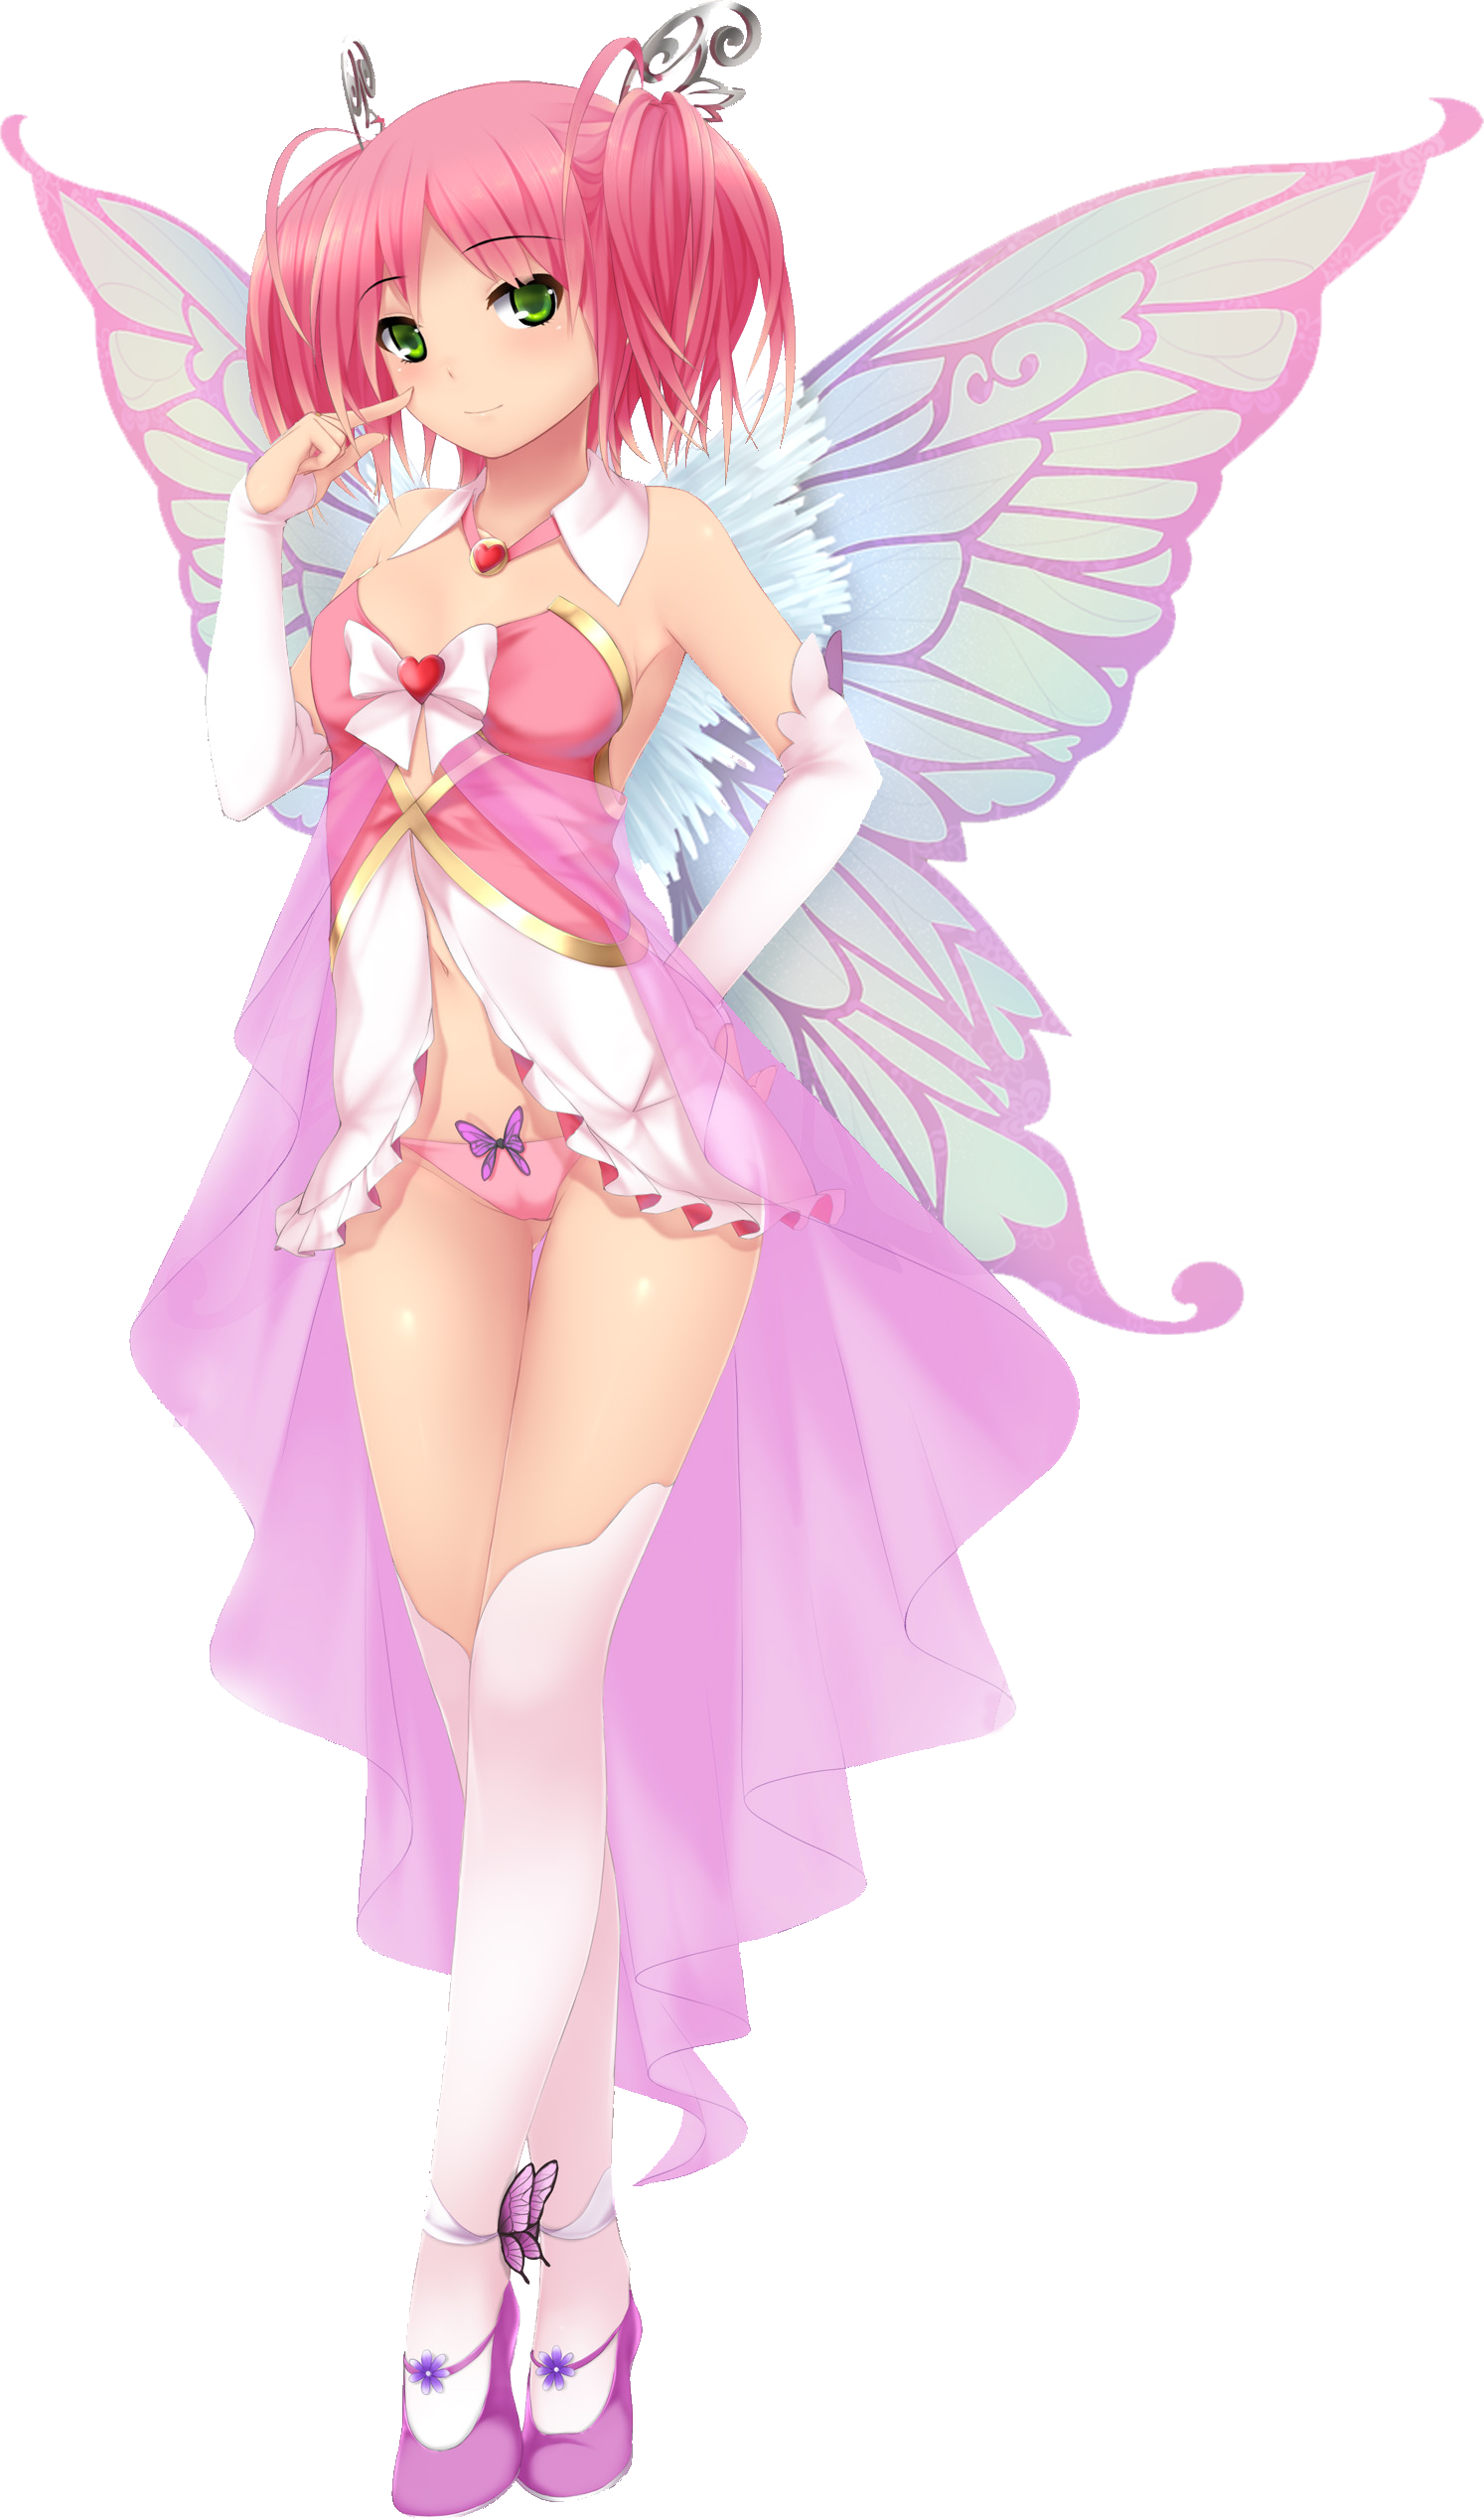 Venus, and a reoccurring character in the Huniepop series of video games. 